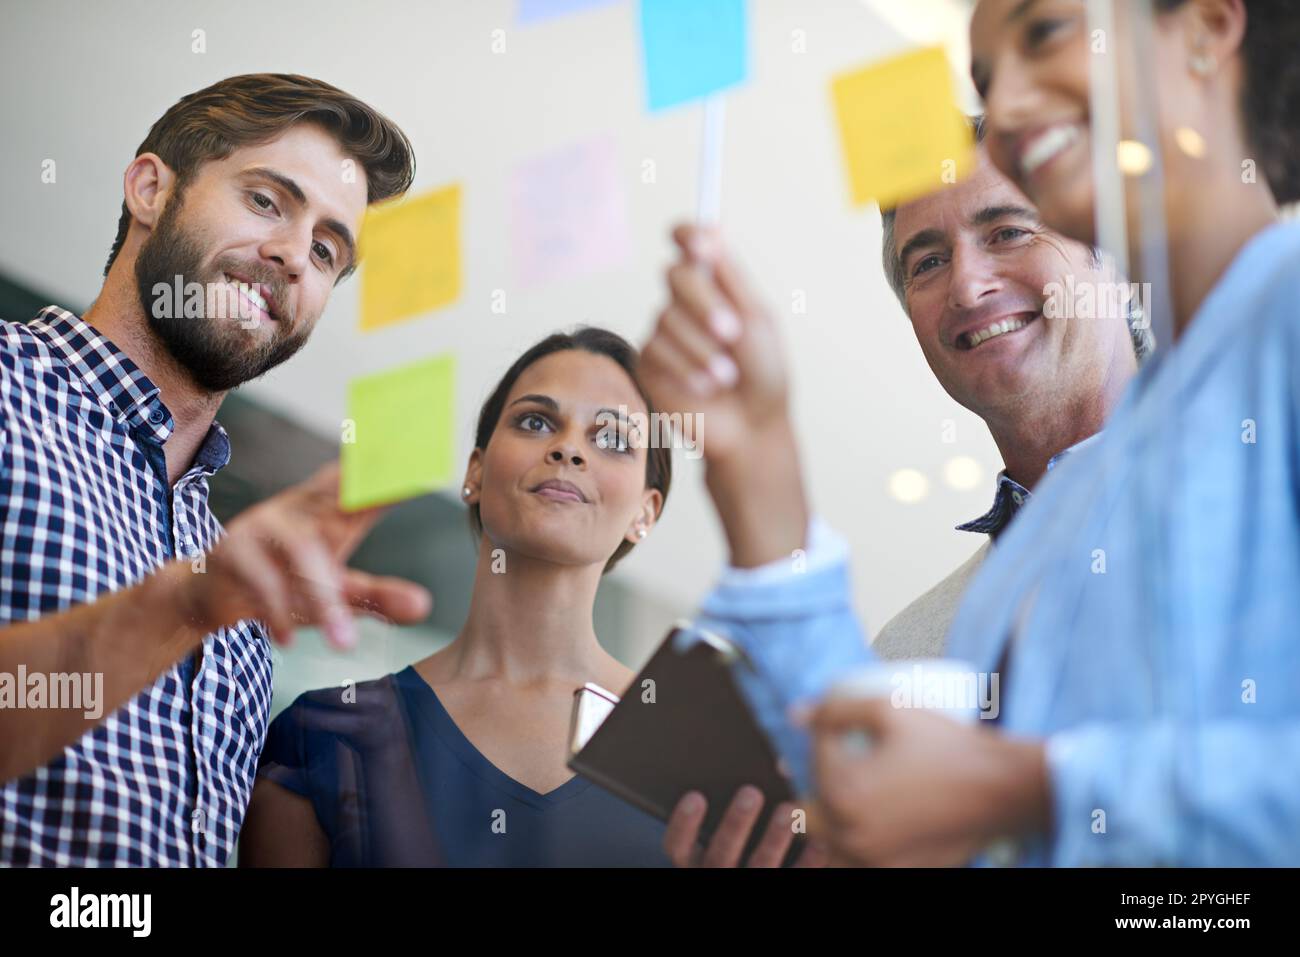 Teamwork makes the dream work. coworkers arranging sticky notes on a glass wall during a brainstorming session. Stock Photo